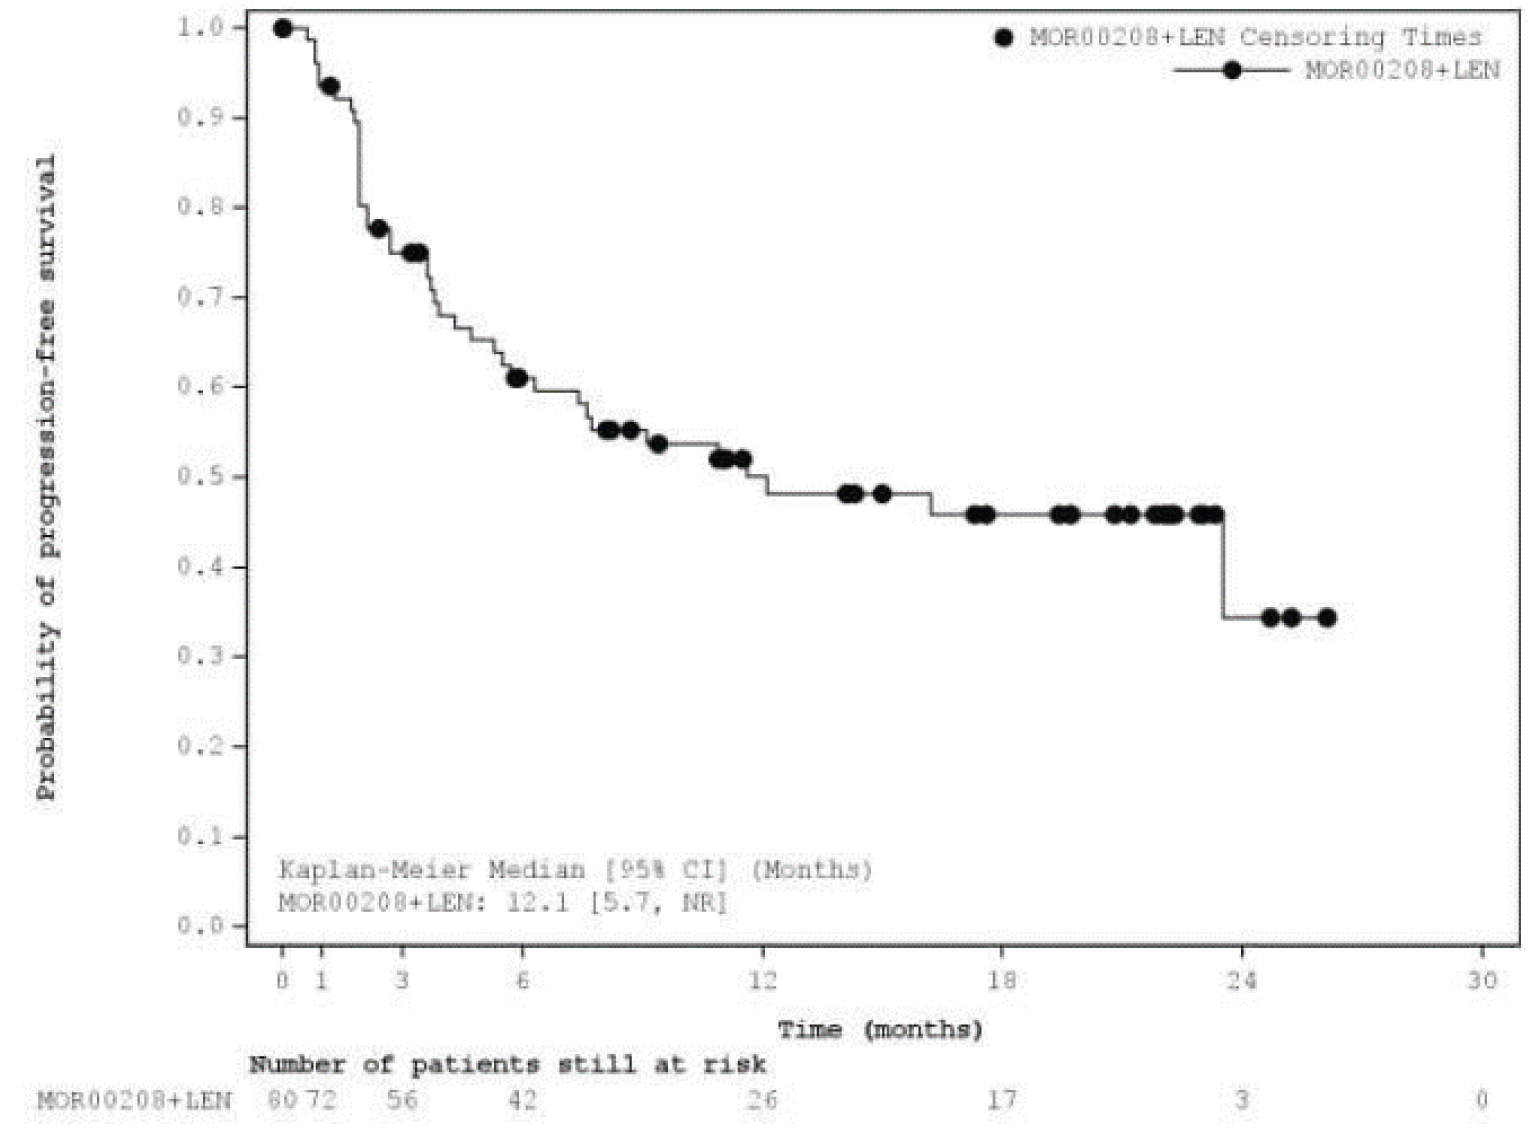 Kaplan–Meier curve of PFS from month 0, with 80 patients still at risk, until month 30, with 0 patients still at risk. The curve decreases until it plateaus at approximately 16 months.